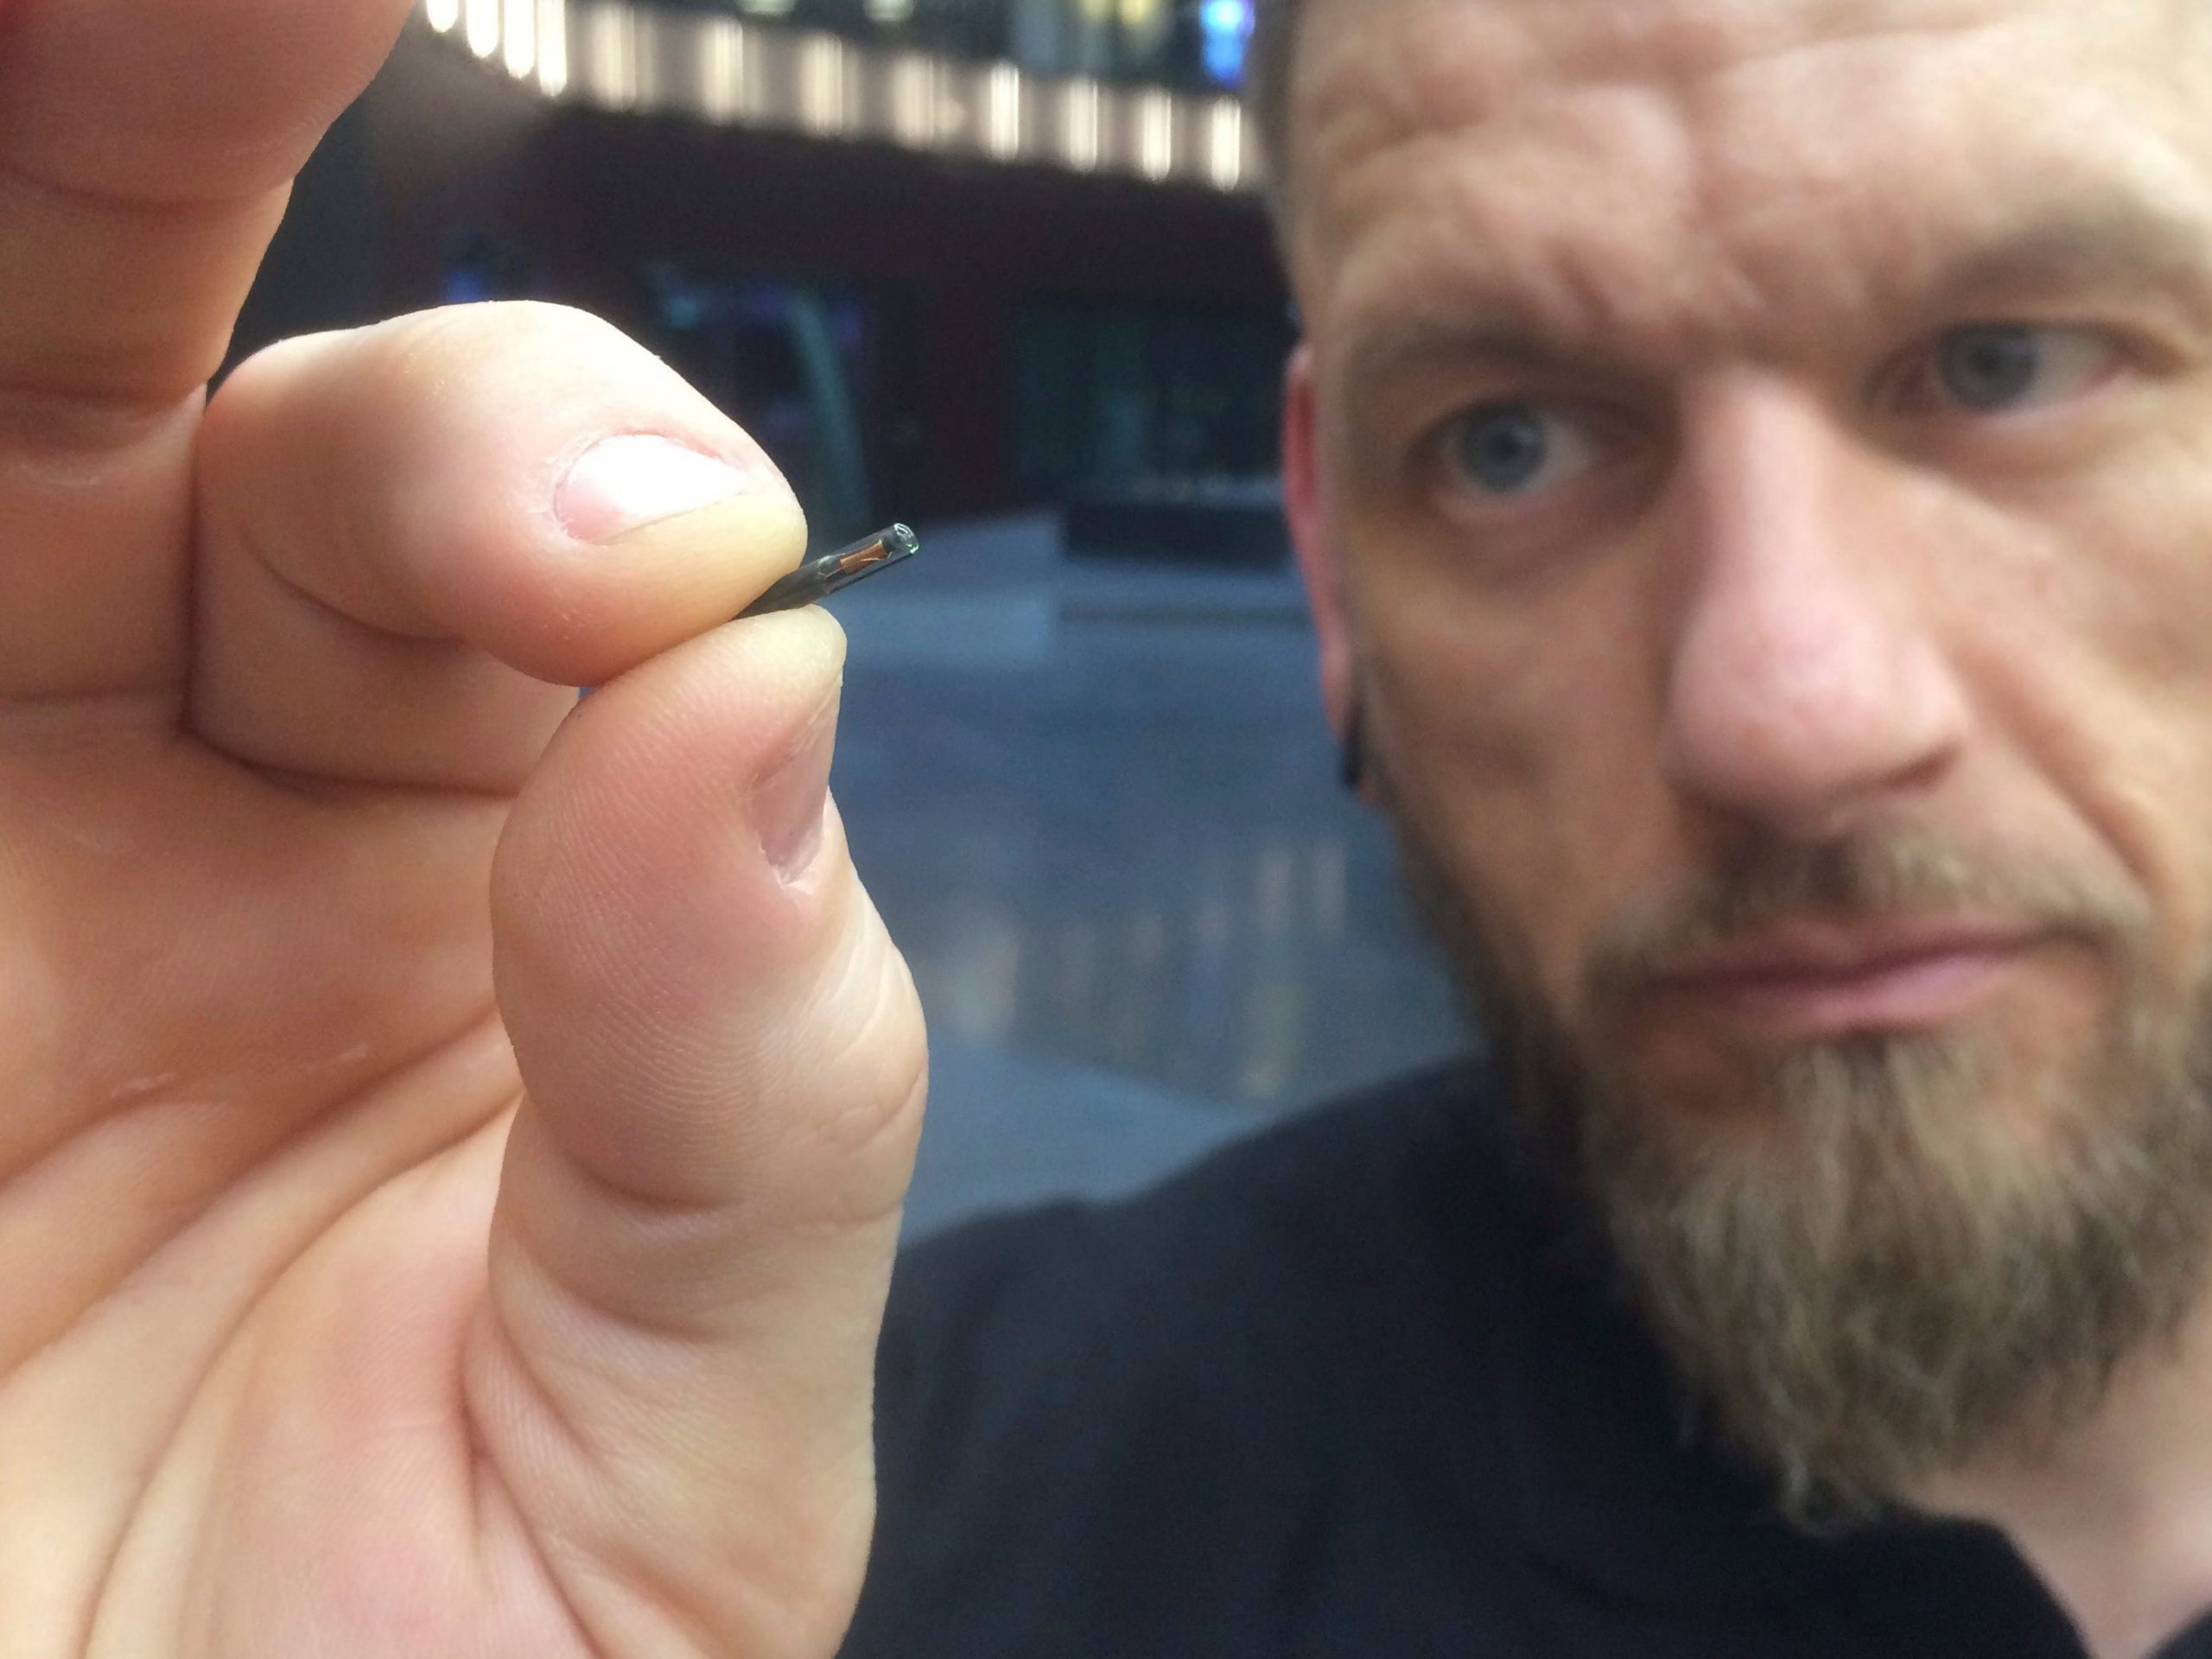 Man holds up a microchip implant the size of a grain.